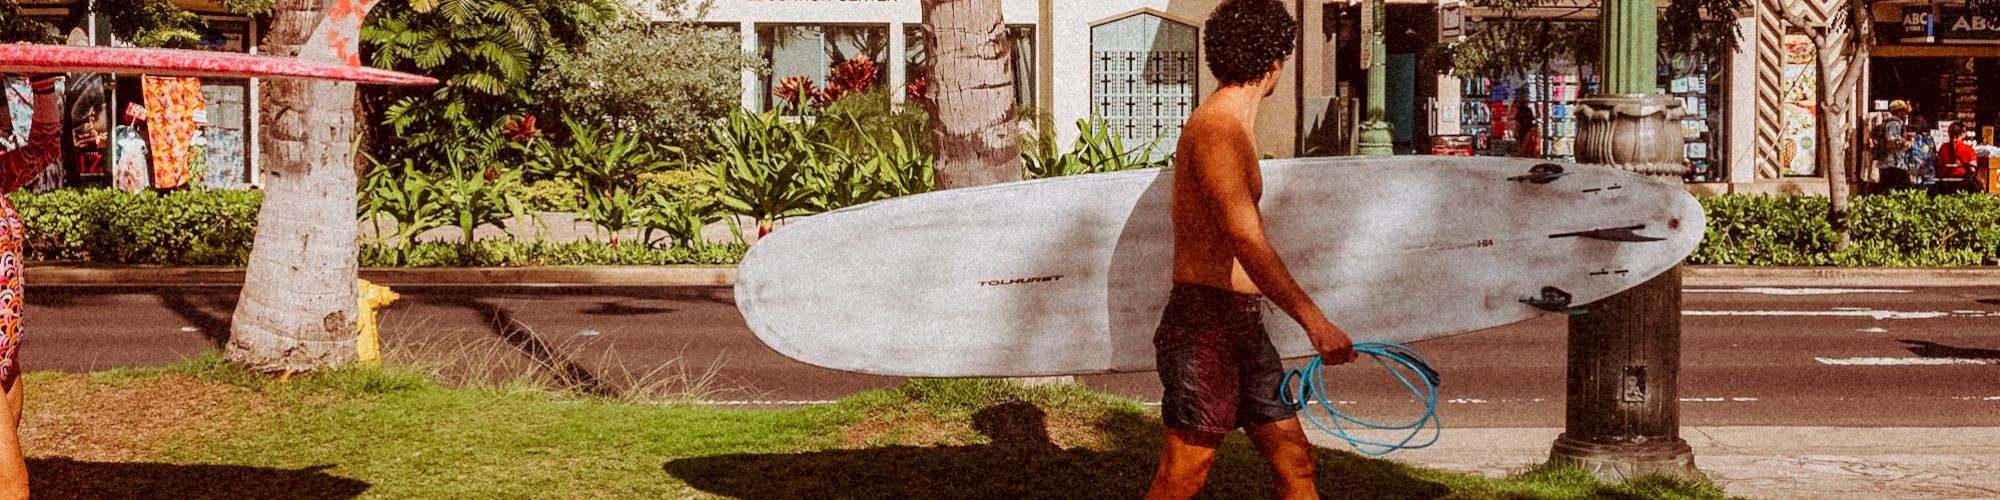 Two individuals are walking on a sidewalk, each carrying a surfboard under their arm, with palm trees and buildings in the background.